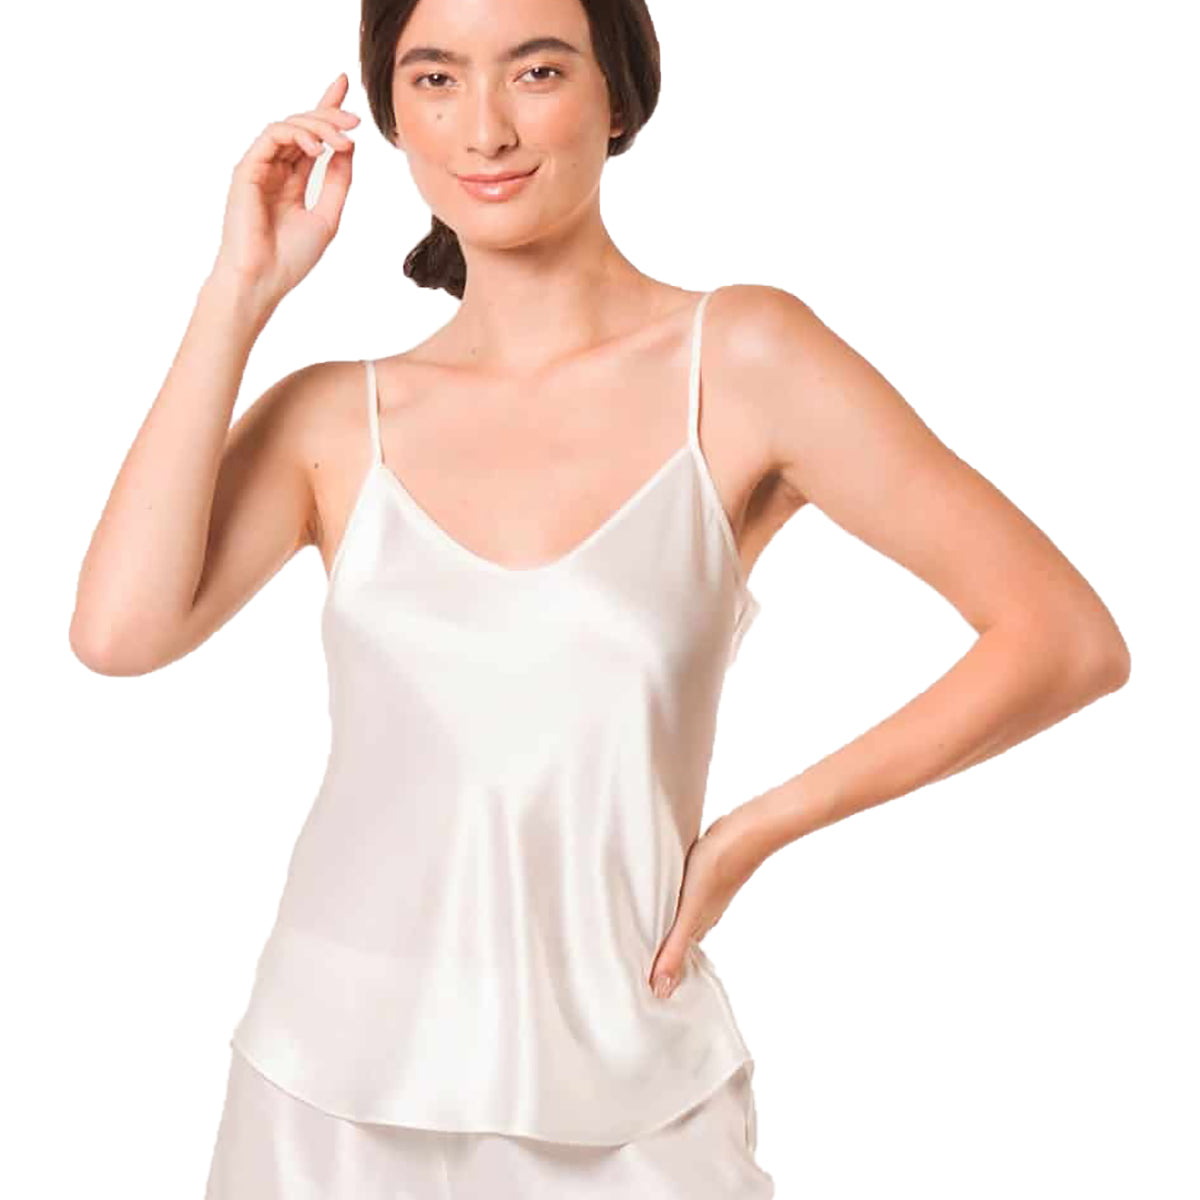 Cream (camisole) Ladies Camisole And Panty Set at Best Price in